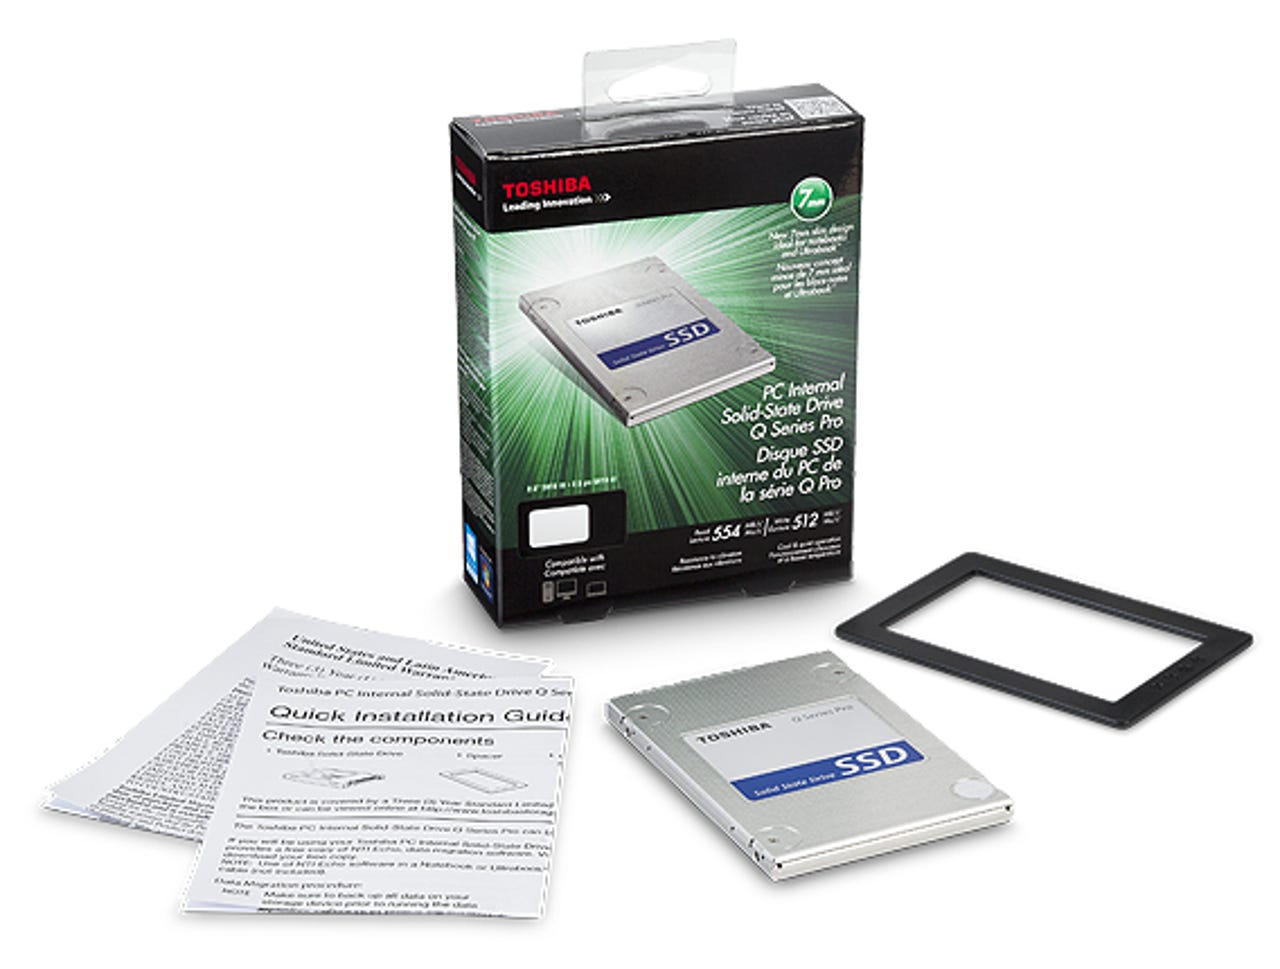 toshiba-q-series-pro-solid-state-drive-ssd